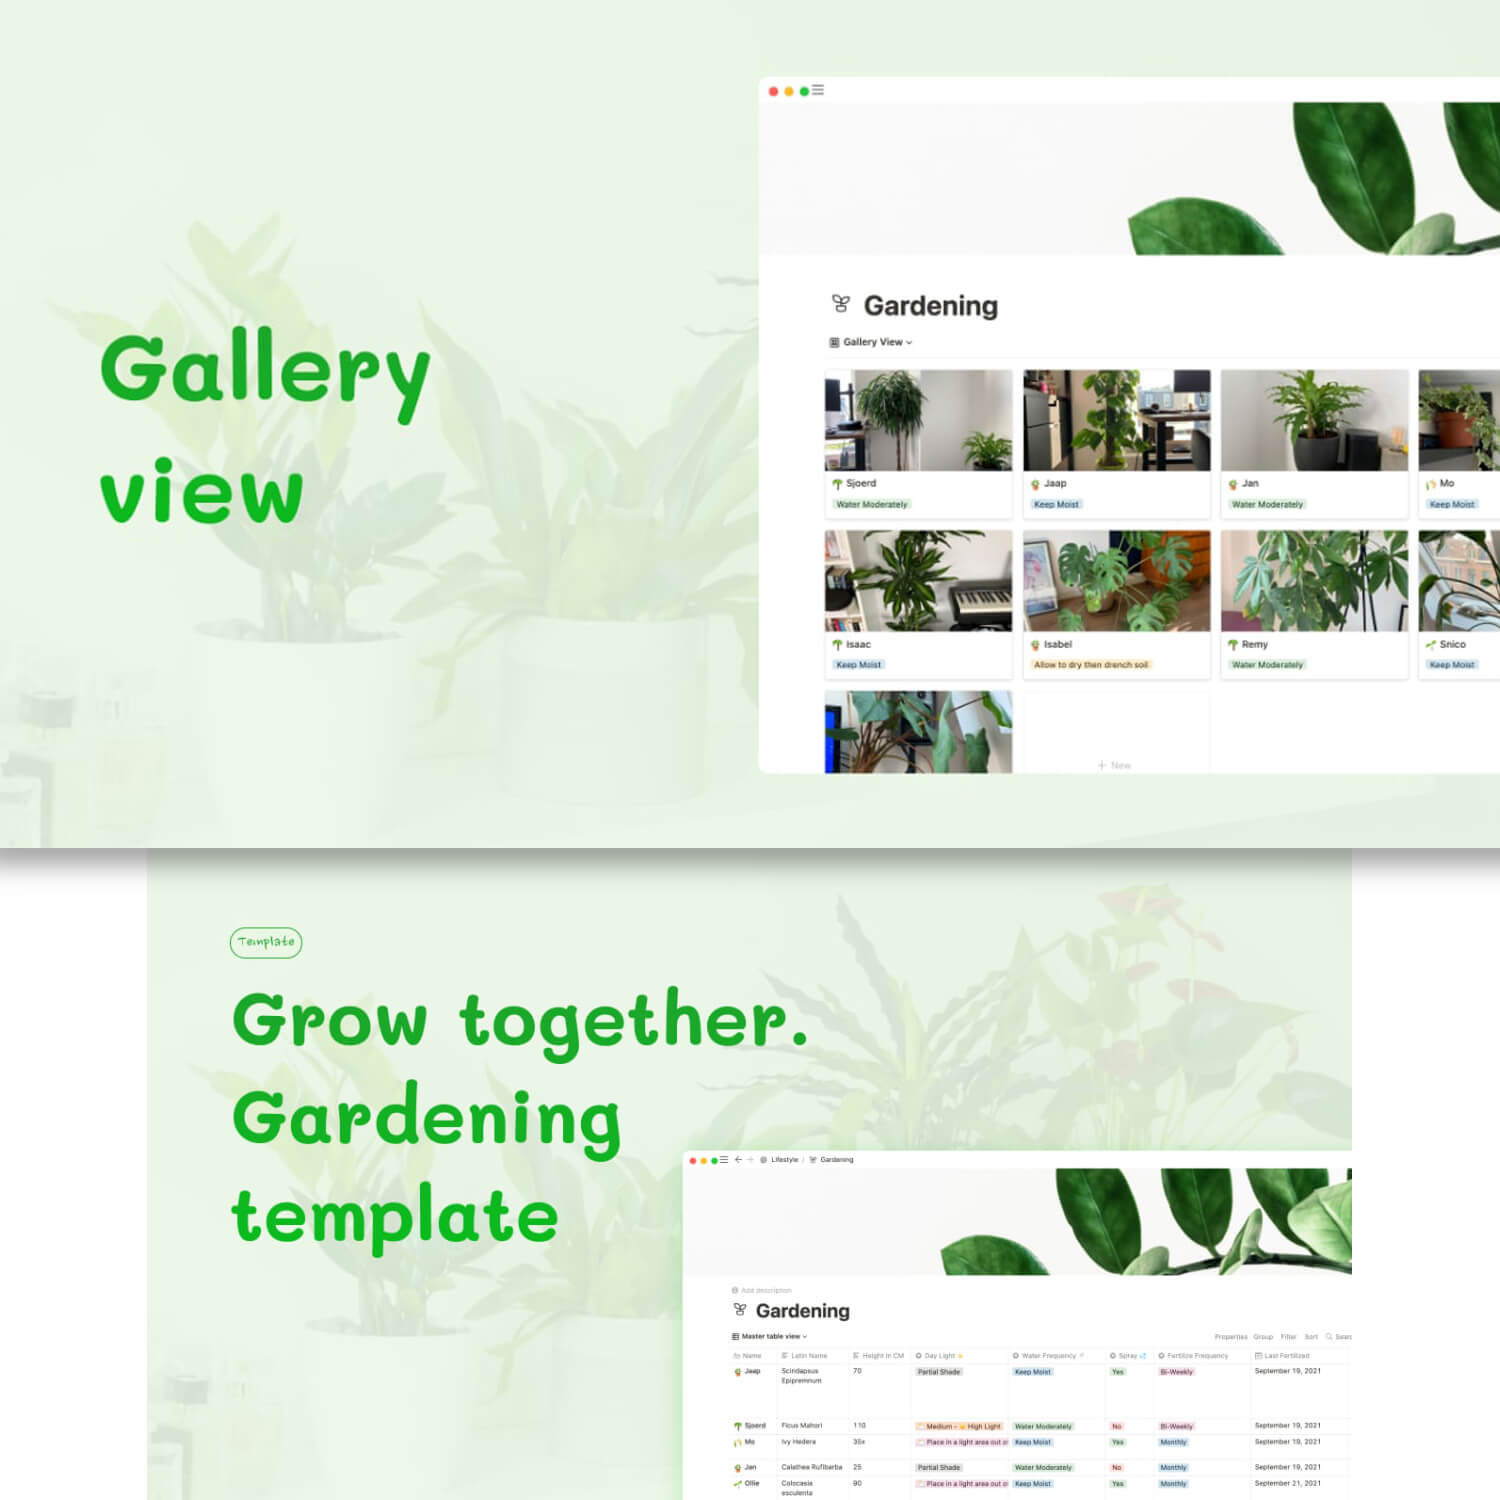 Grow together, gardening template.